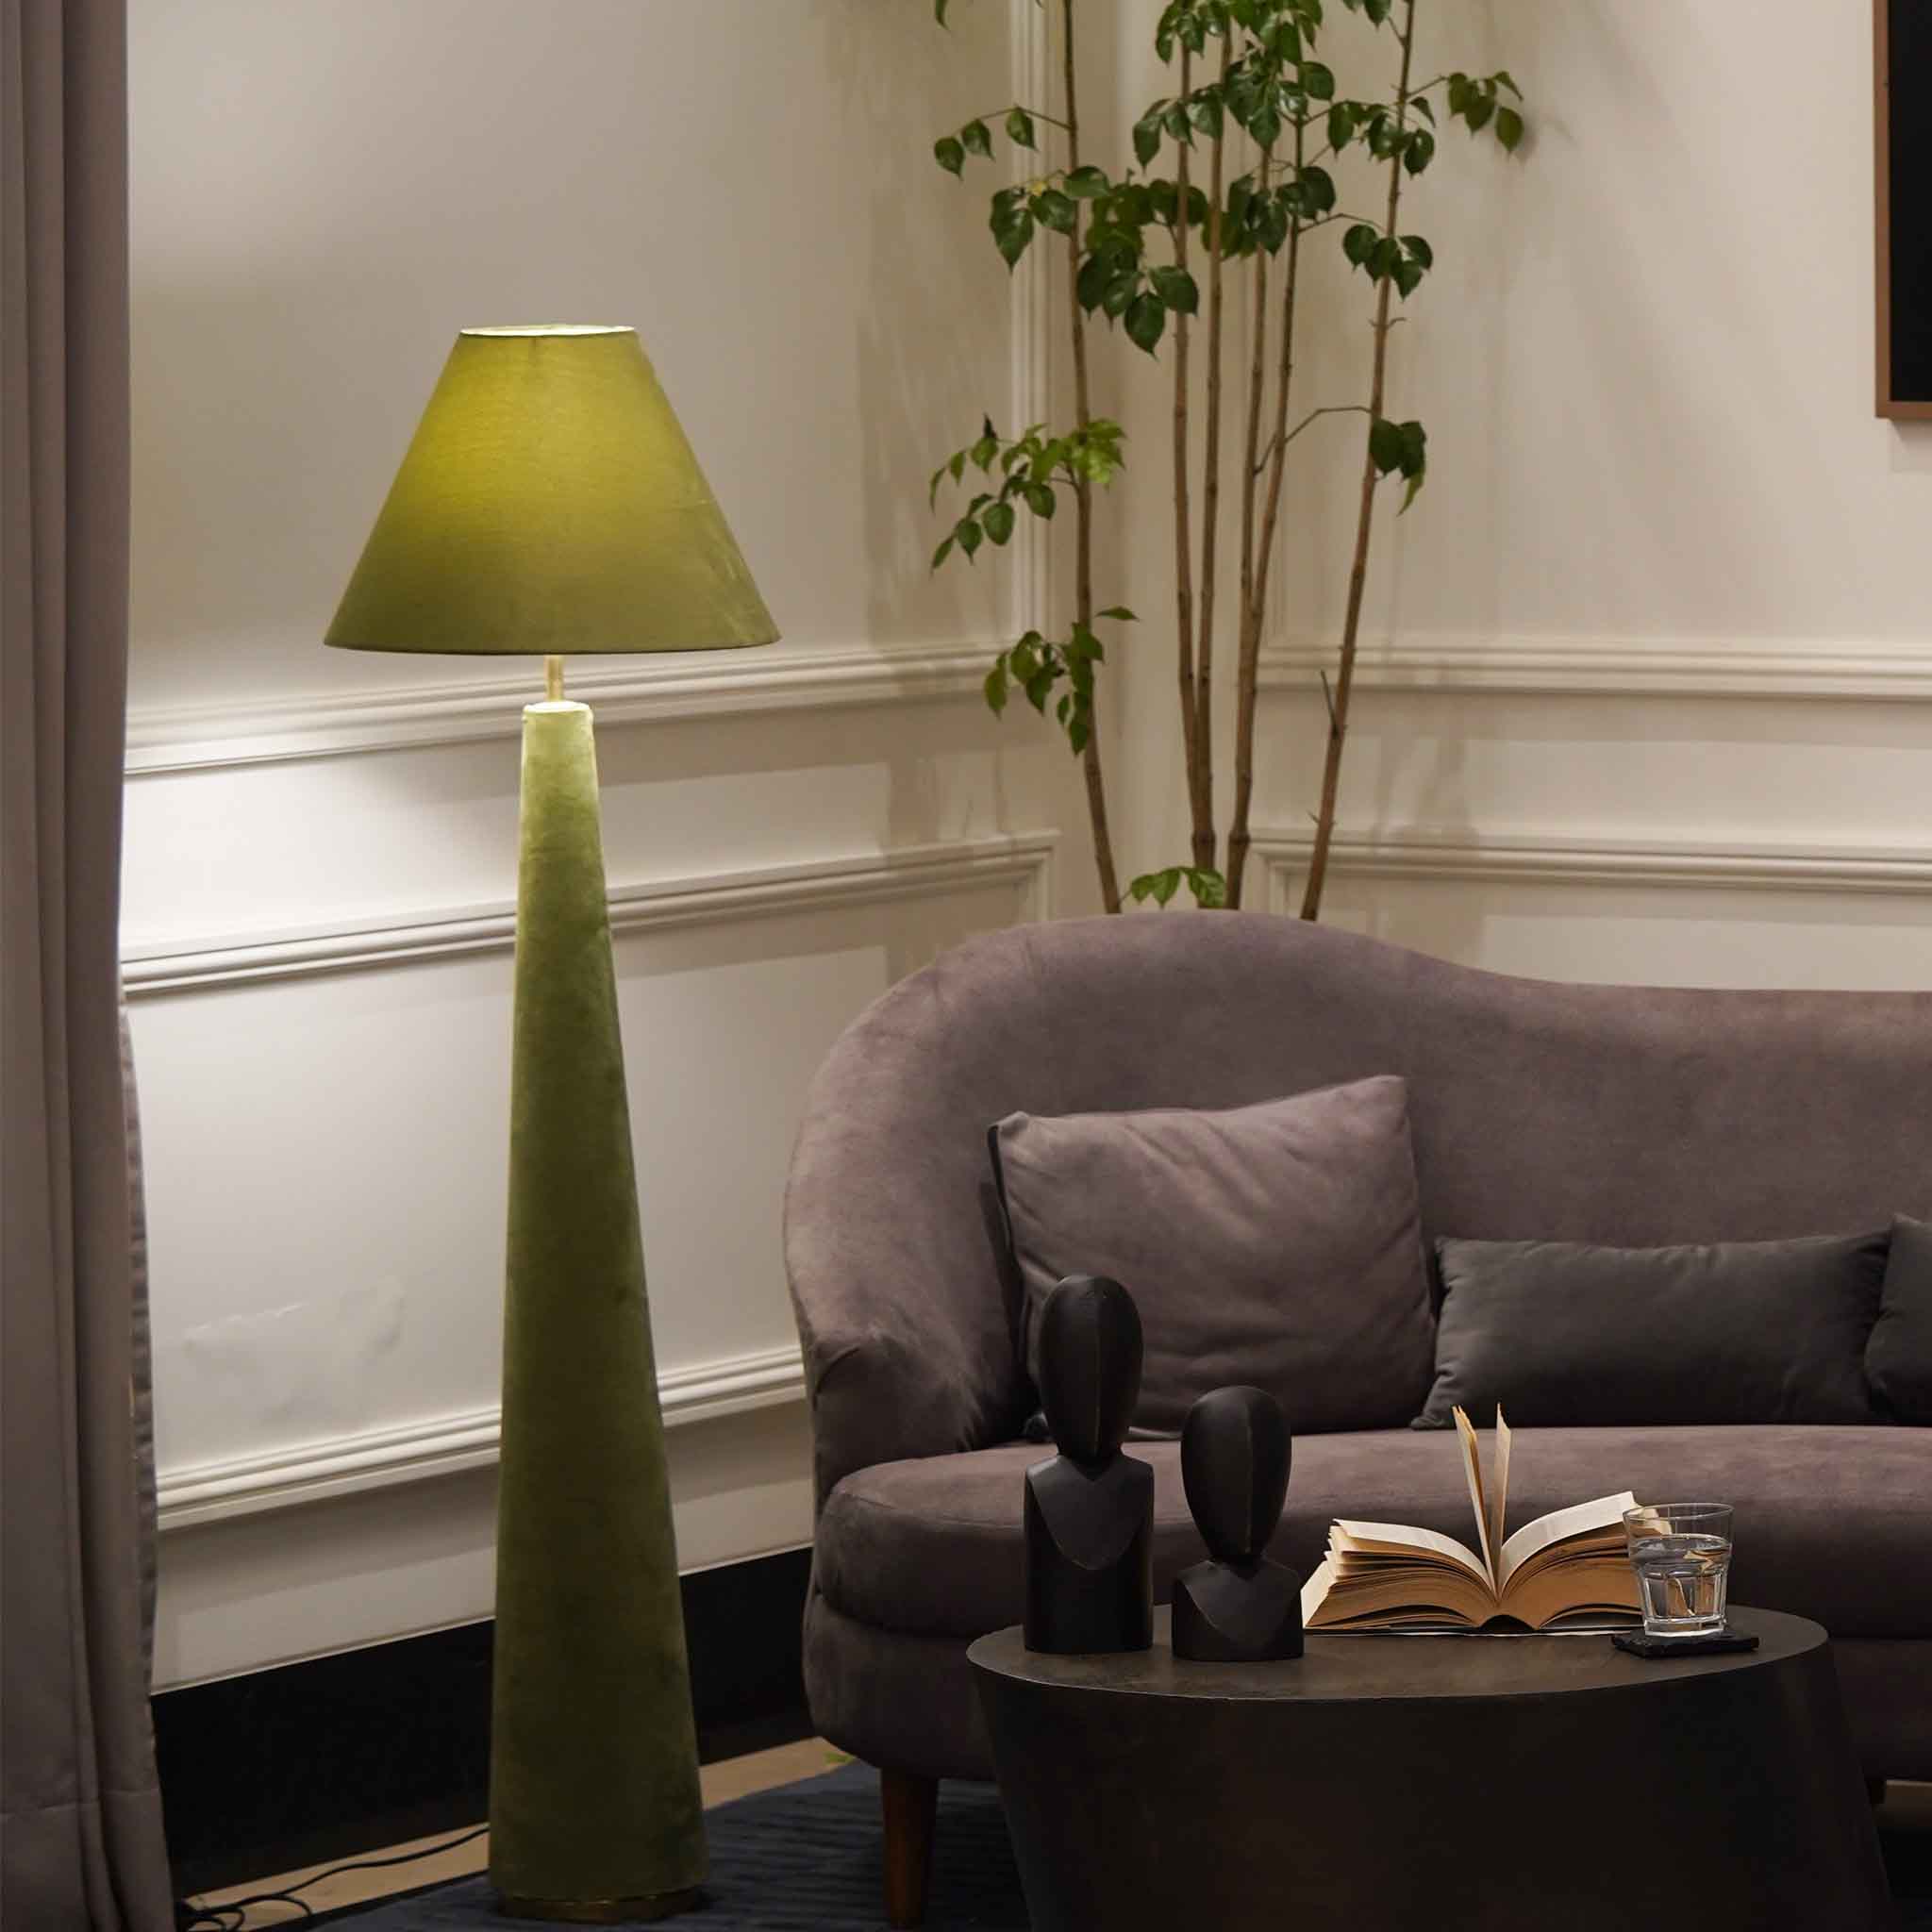 Green colored velvet floor lamp is lit-up and placed in a living room set-up.